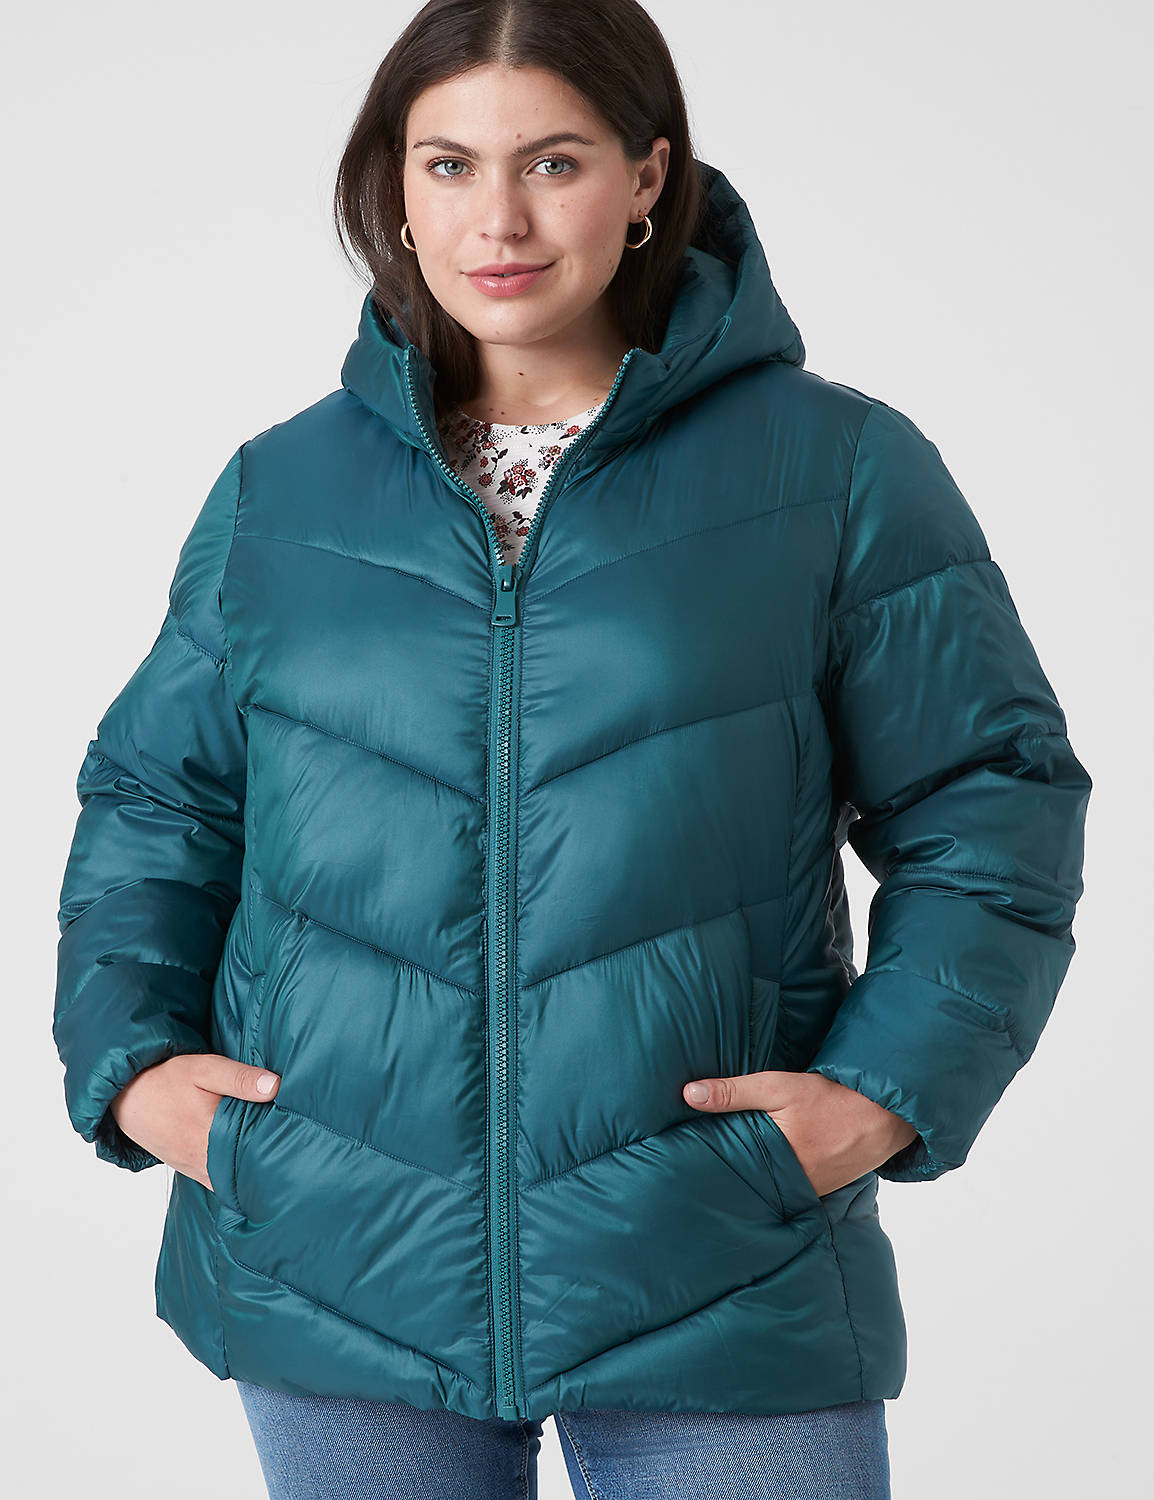 REGULAR LENGTH PUFFER with Hood 113 Product Image 4